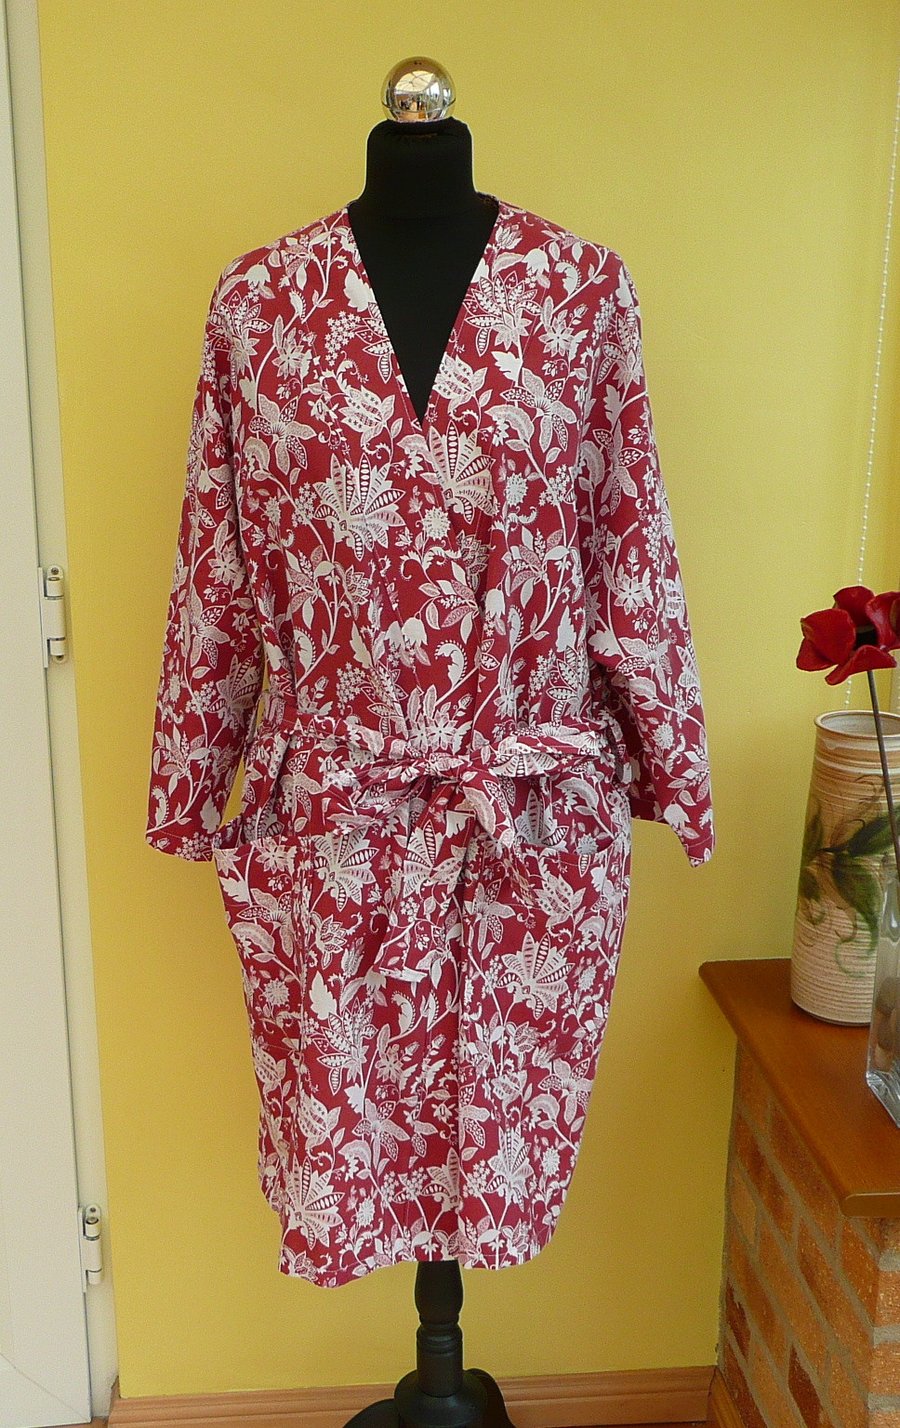 Kimono dressing gown repurposed upcycled duvet cover floral bath robe